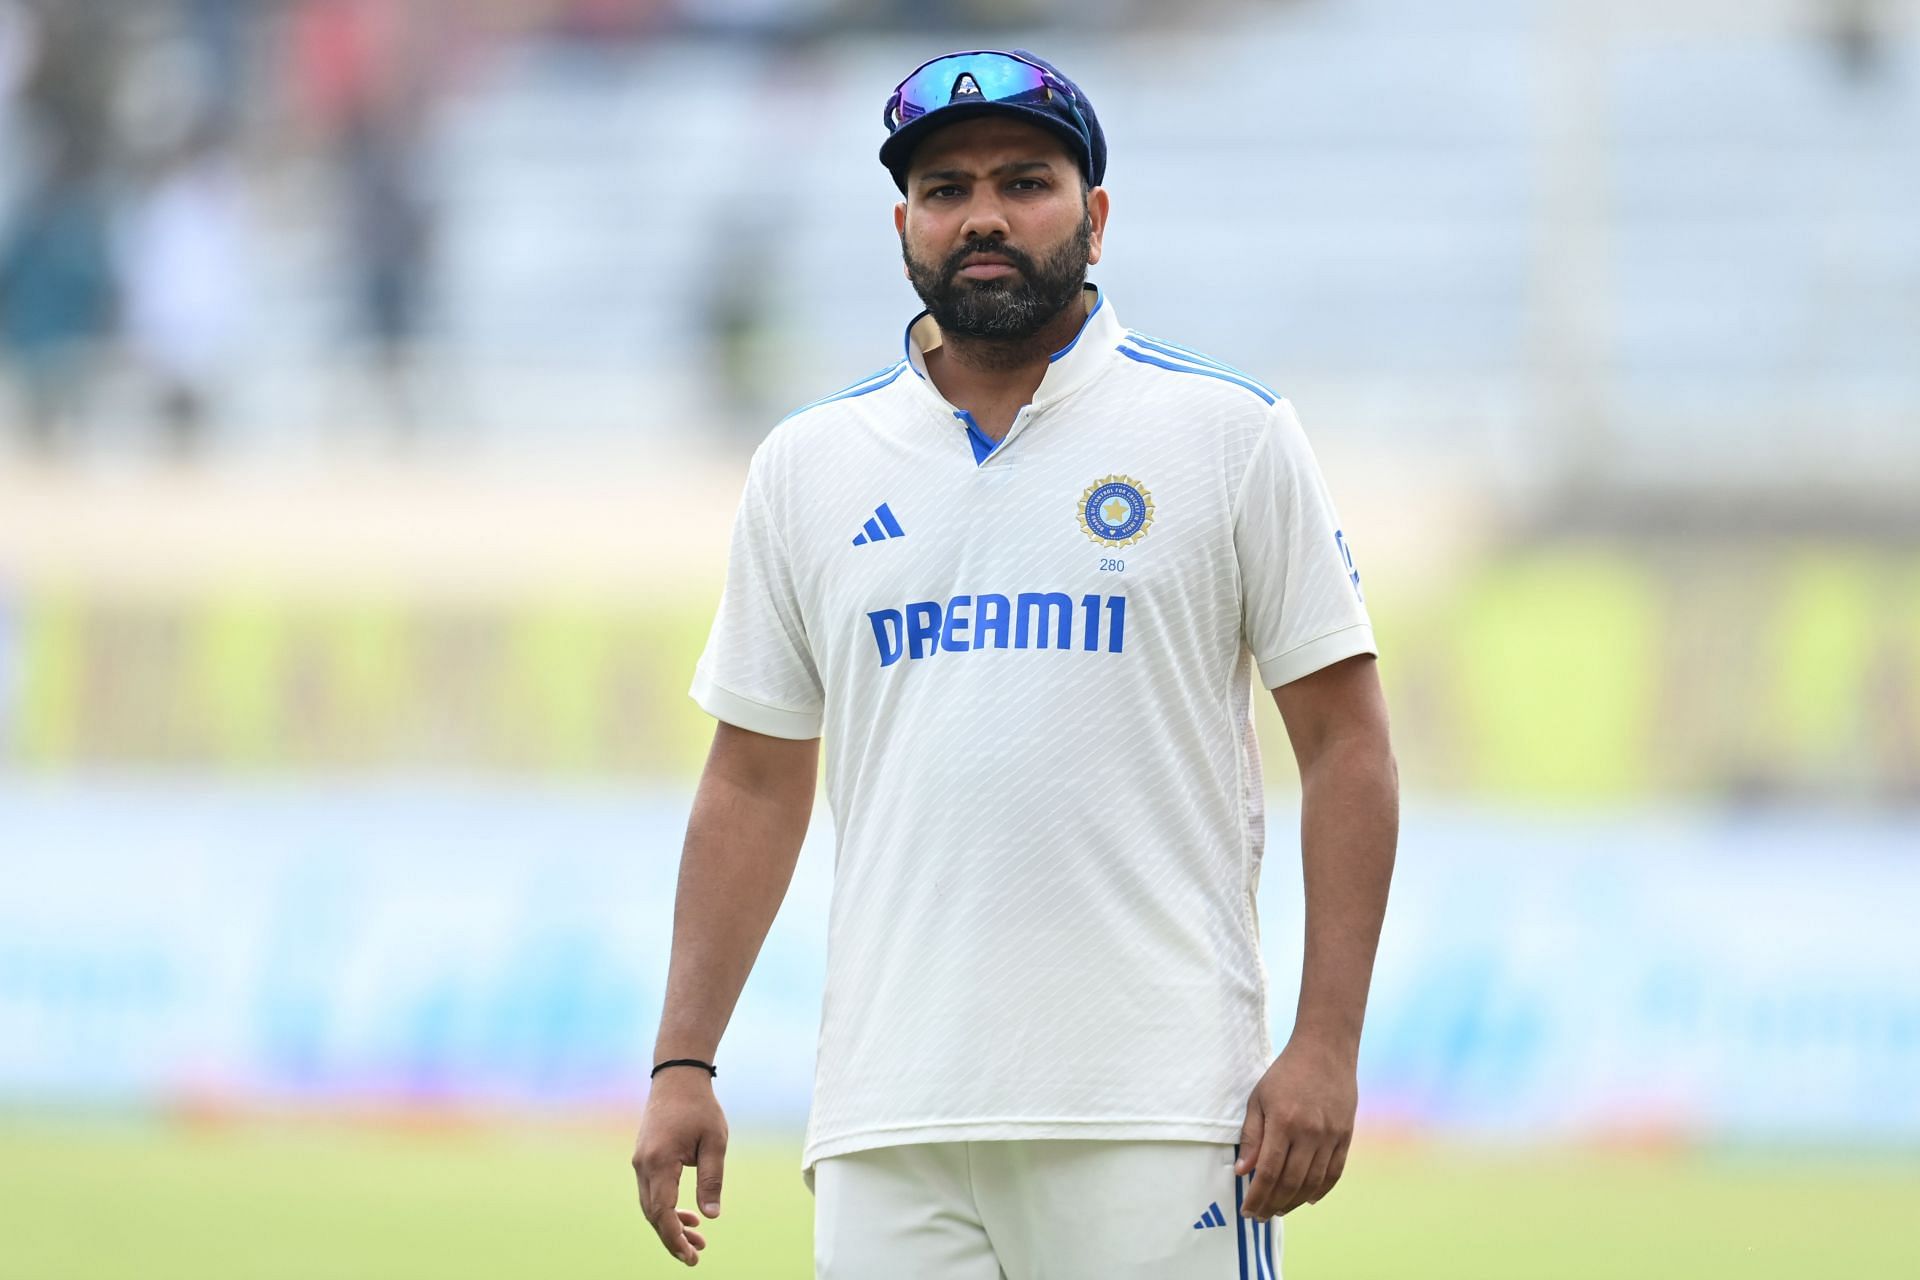 Rohit recently led an inexperienced Indian side to a Test series win against England.